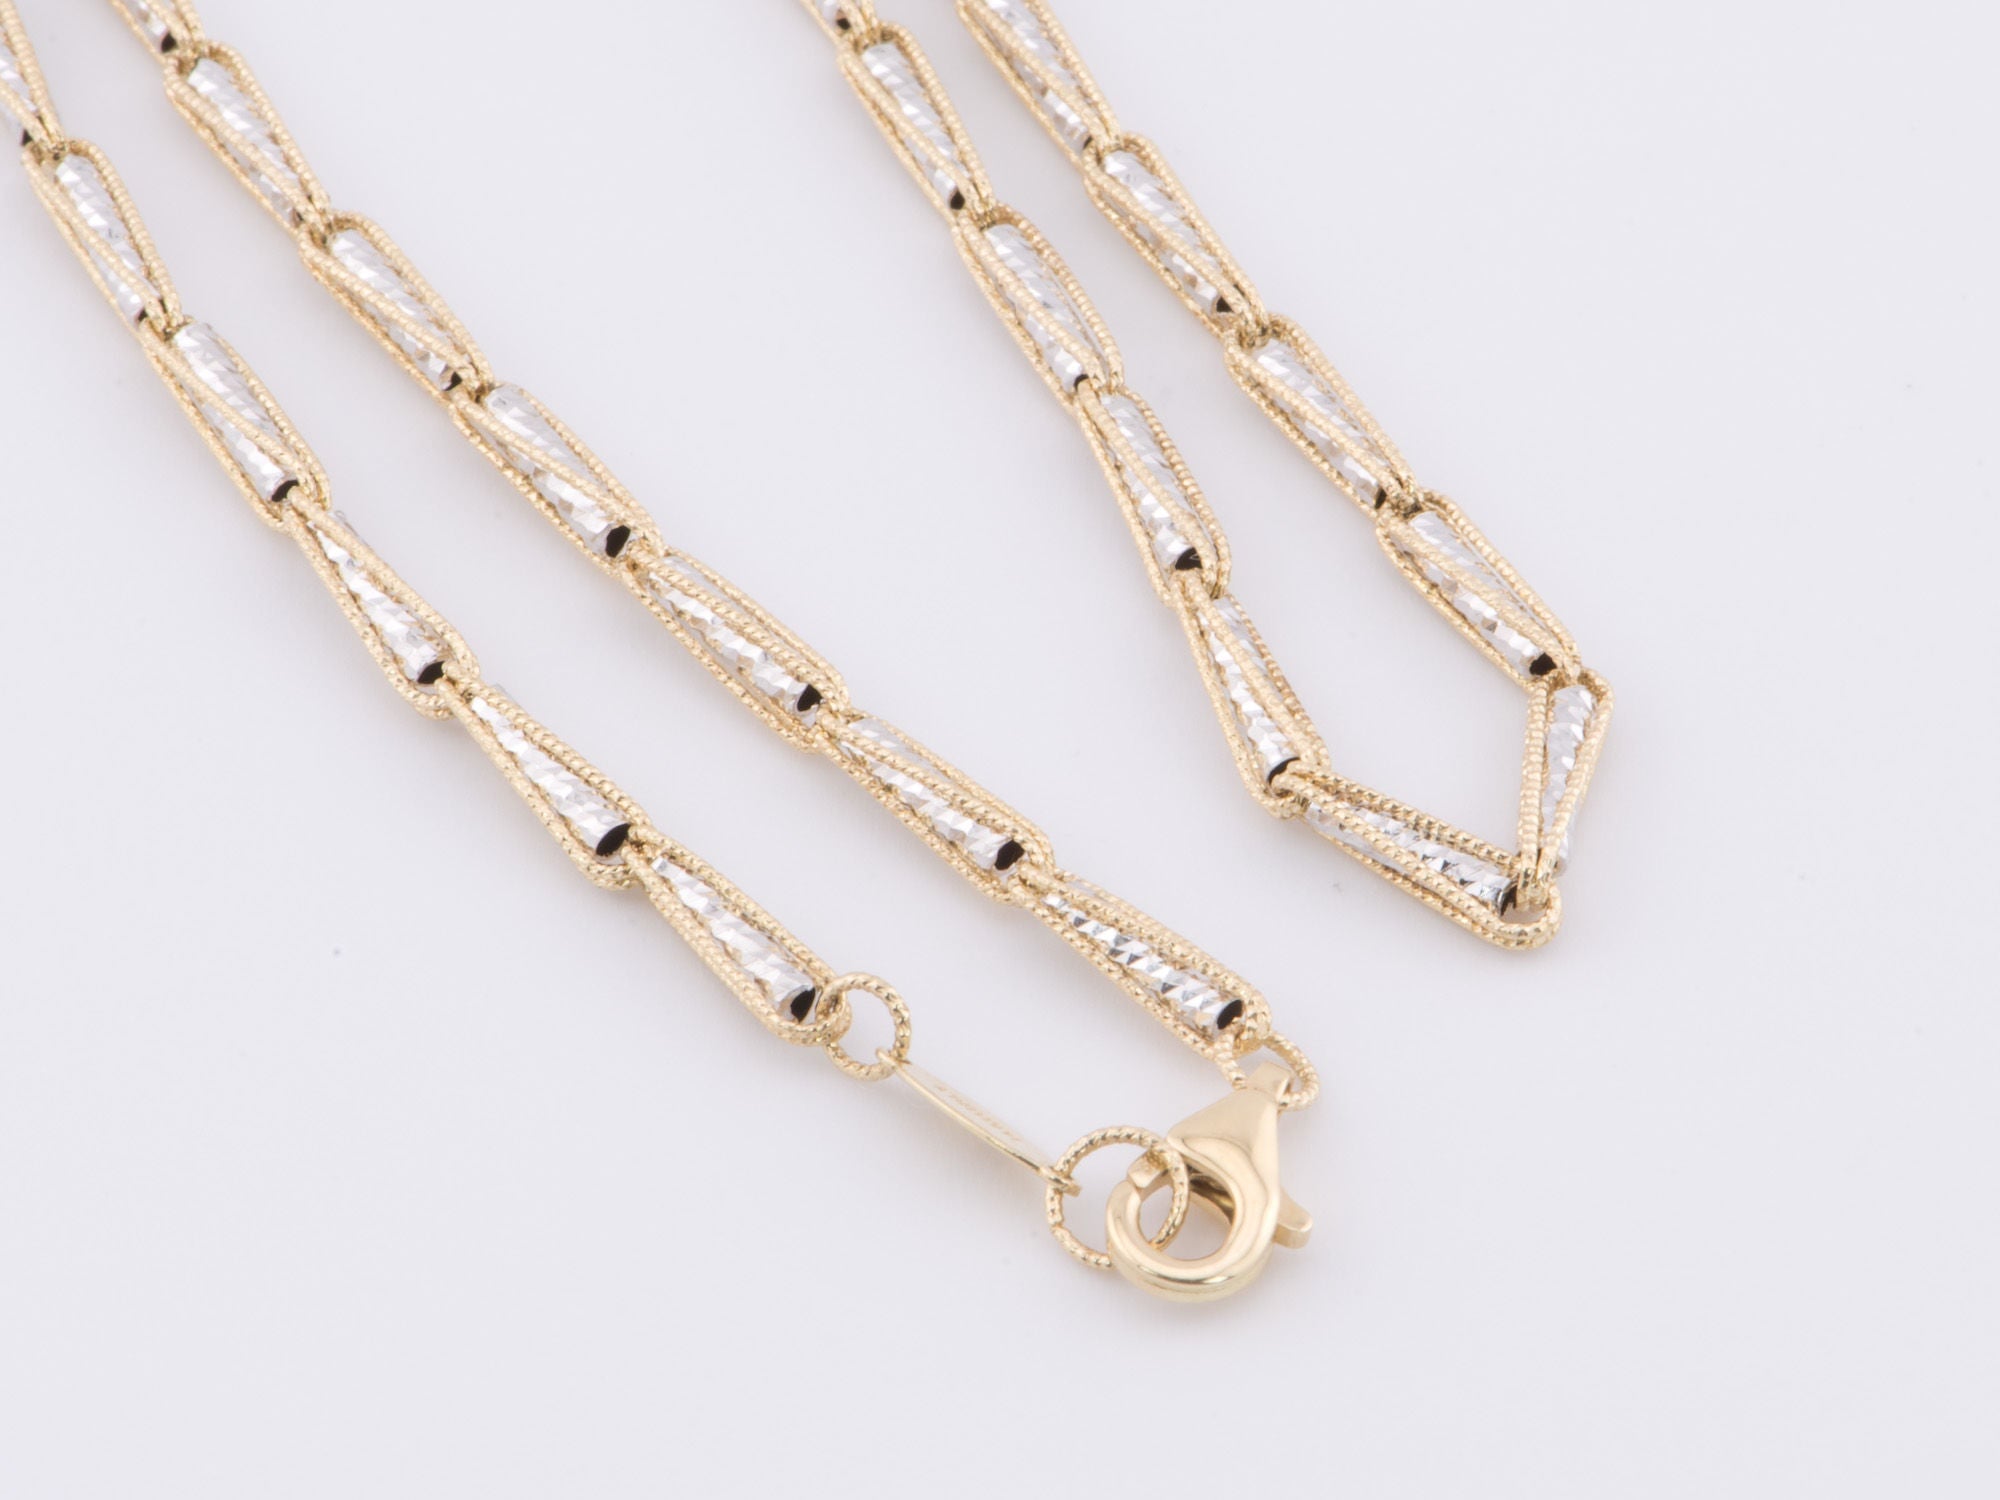 Dot and Dash 18K Gold Specialty Necklace Chain 17.5 R4182 - Jo Dane